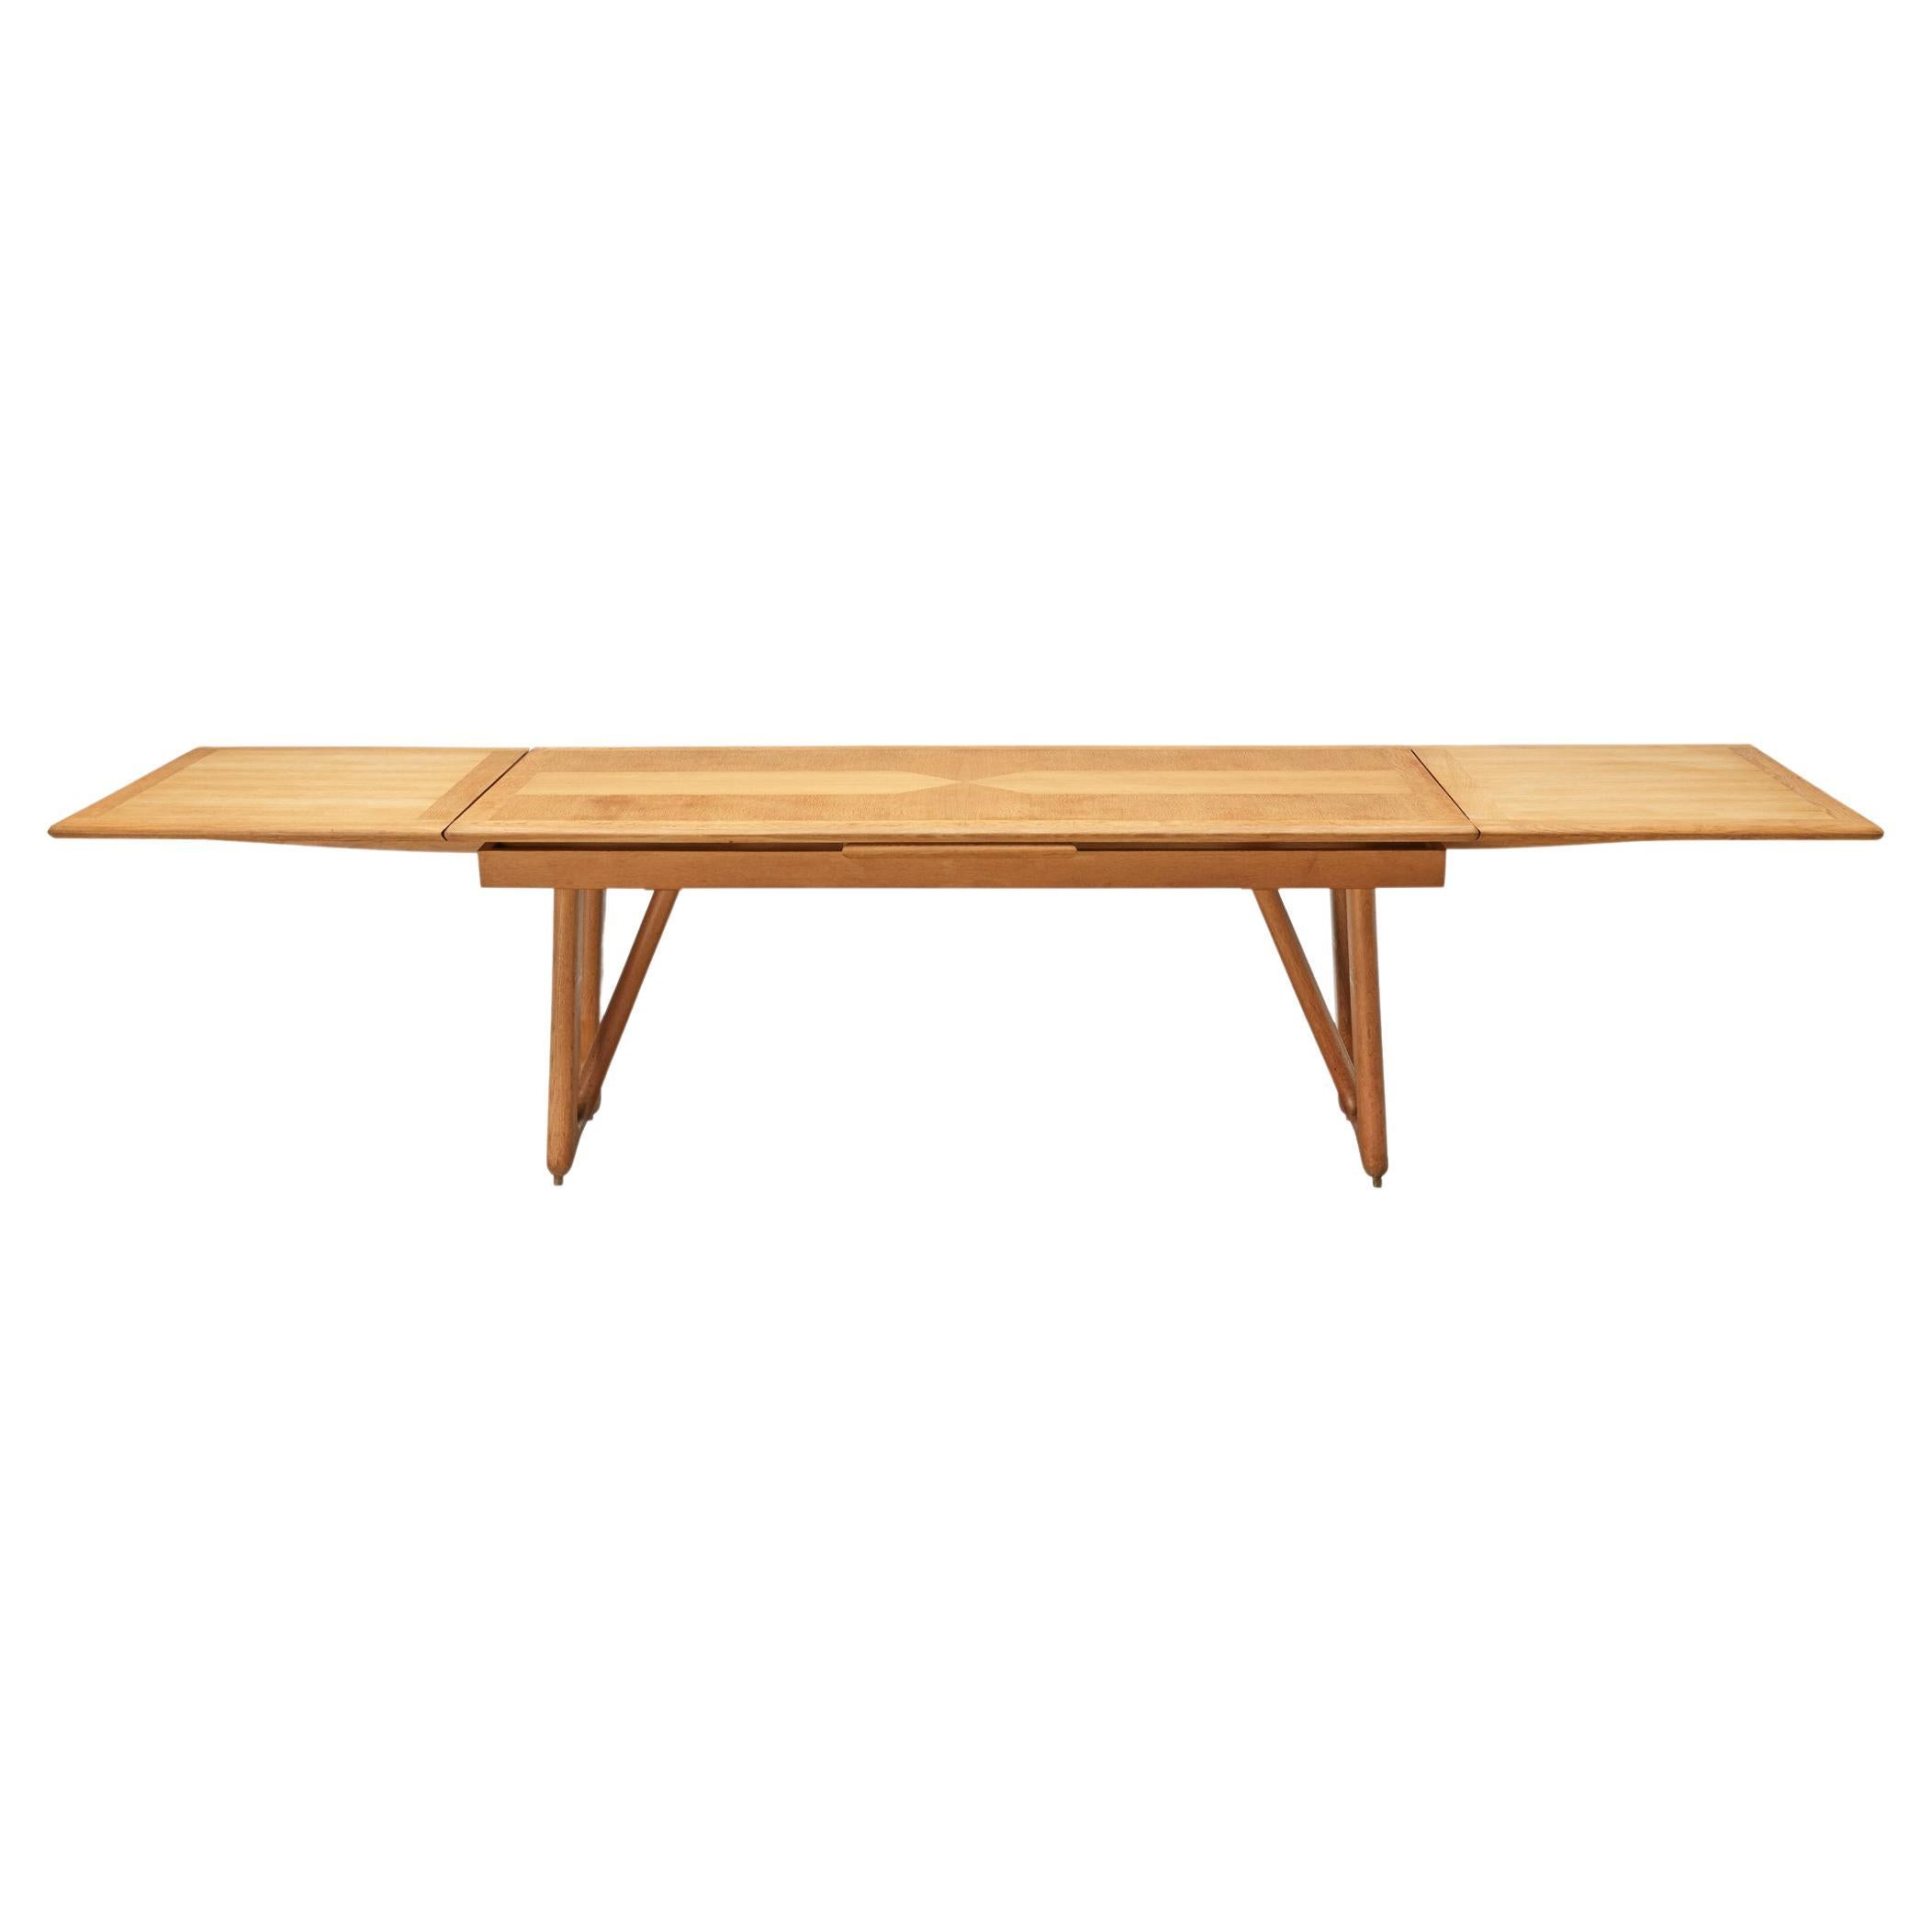 Guillerme & Chambron 'Petronille' Dining Table in Oak